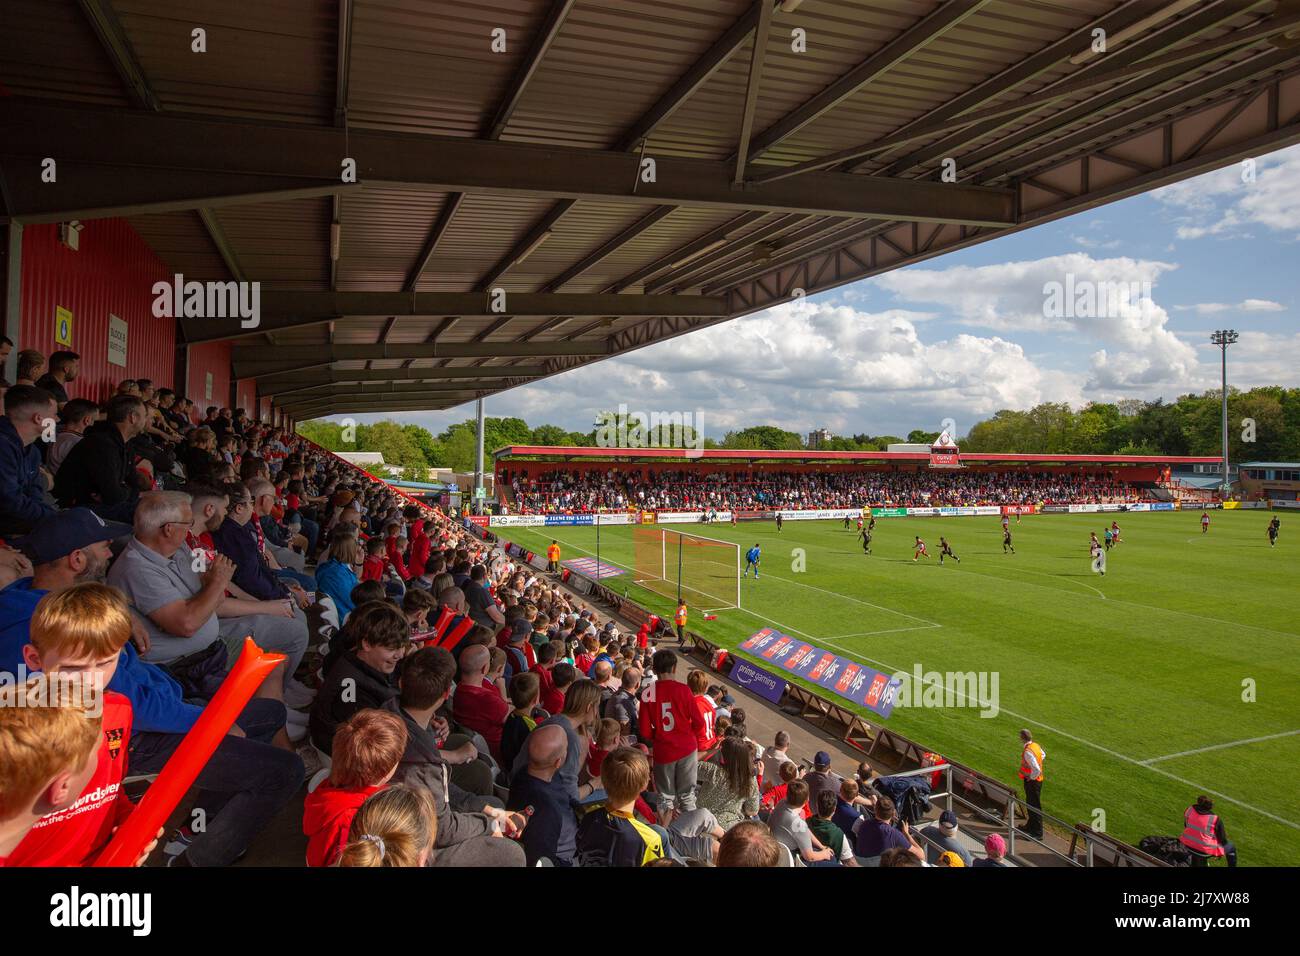 General view looking out onto the pitch at The Lamex Stadium, home of Stevenage Football Club from the North Stand  during match Stock Photo